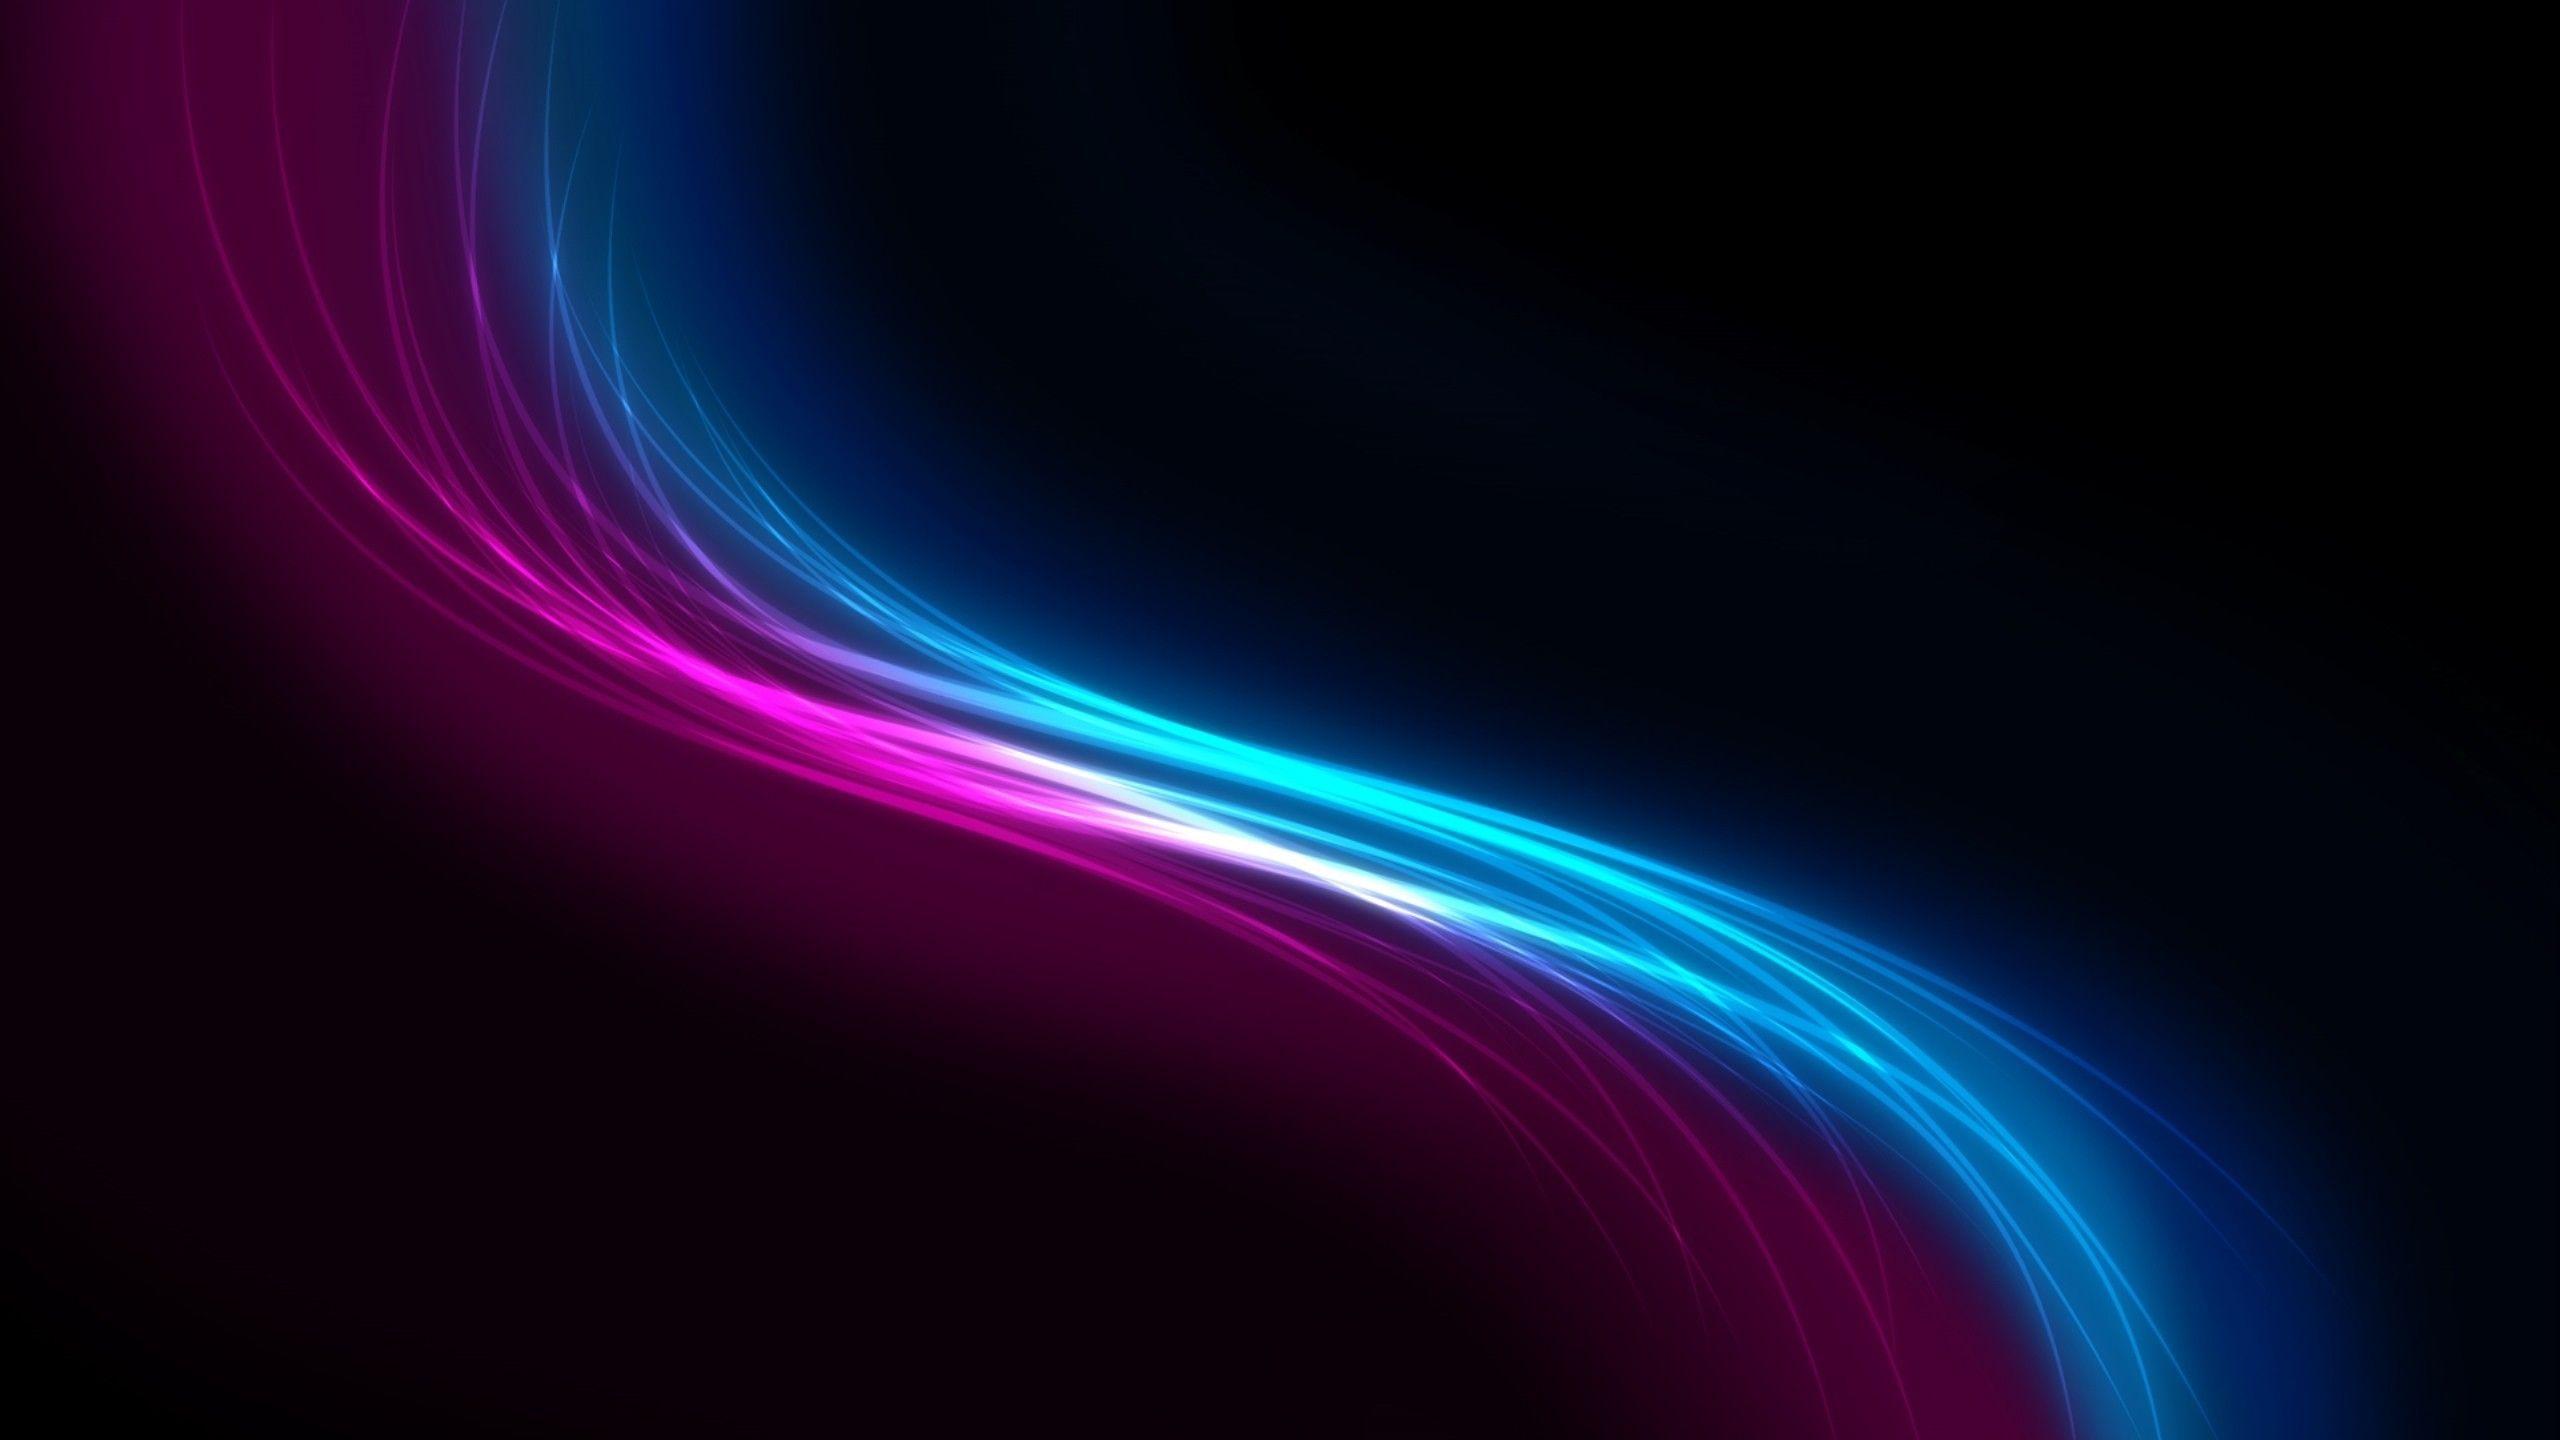 Dark Pink and Blue Abstract Wallpapers